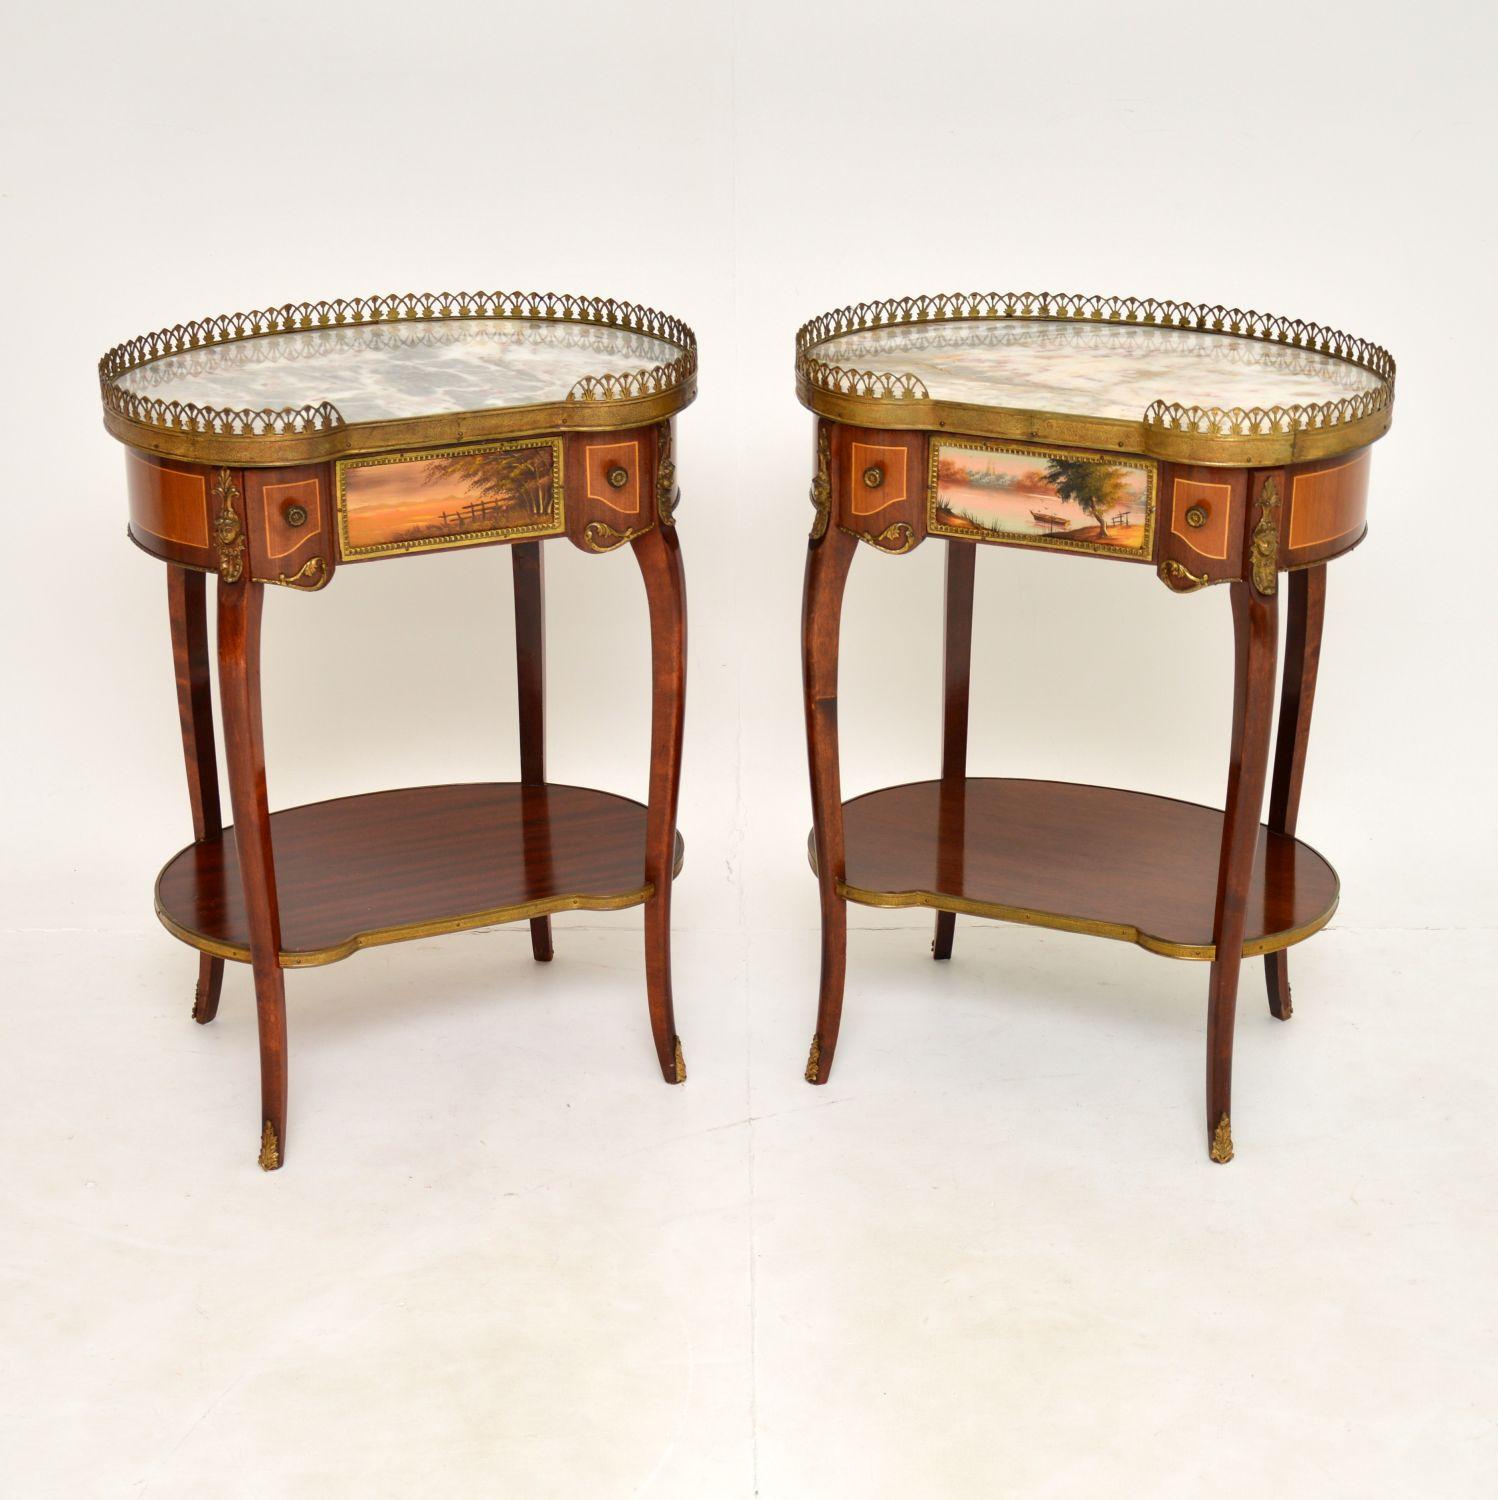 A stunning pair of antique French style kidney shaped side tables, dating from around the 1930’s period.

The quality is superb, with gorgeous marble tops and high quality gilt brass mounts throughout. They have beautifully painted plaques on the